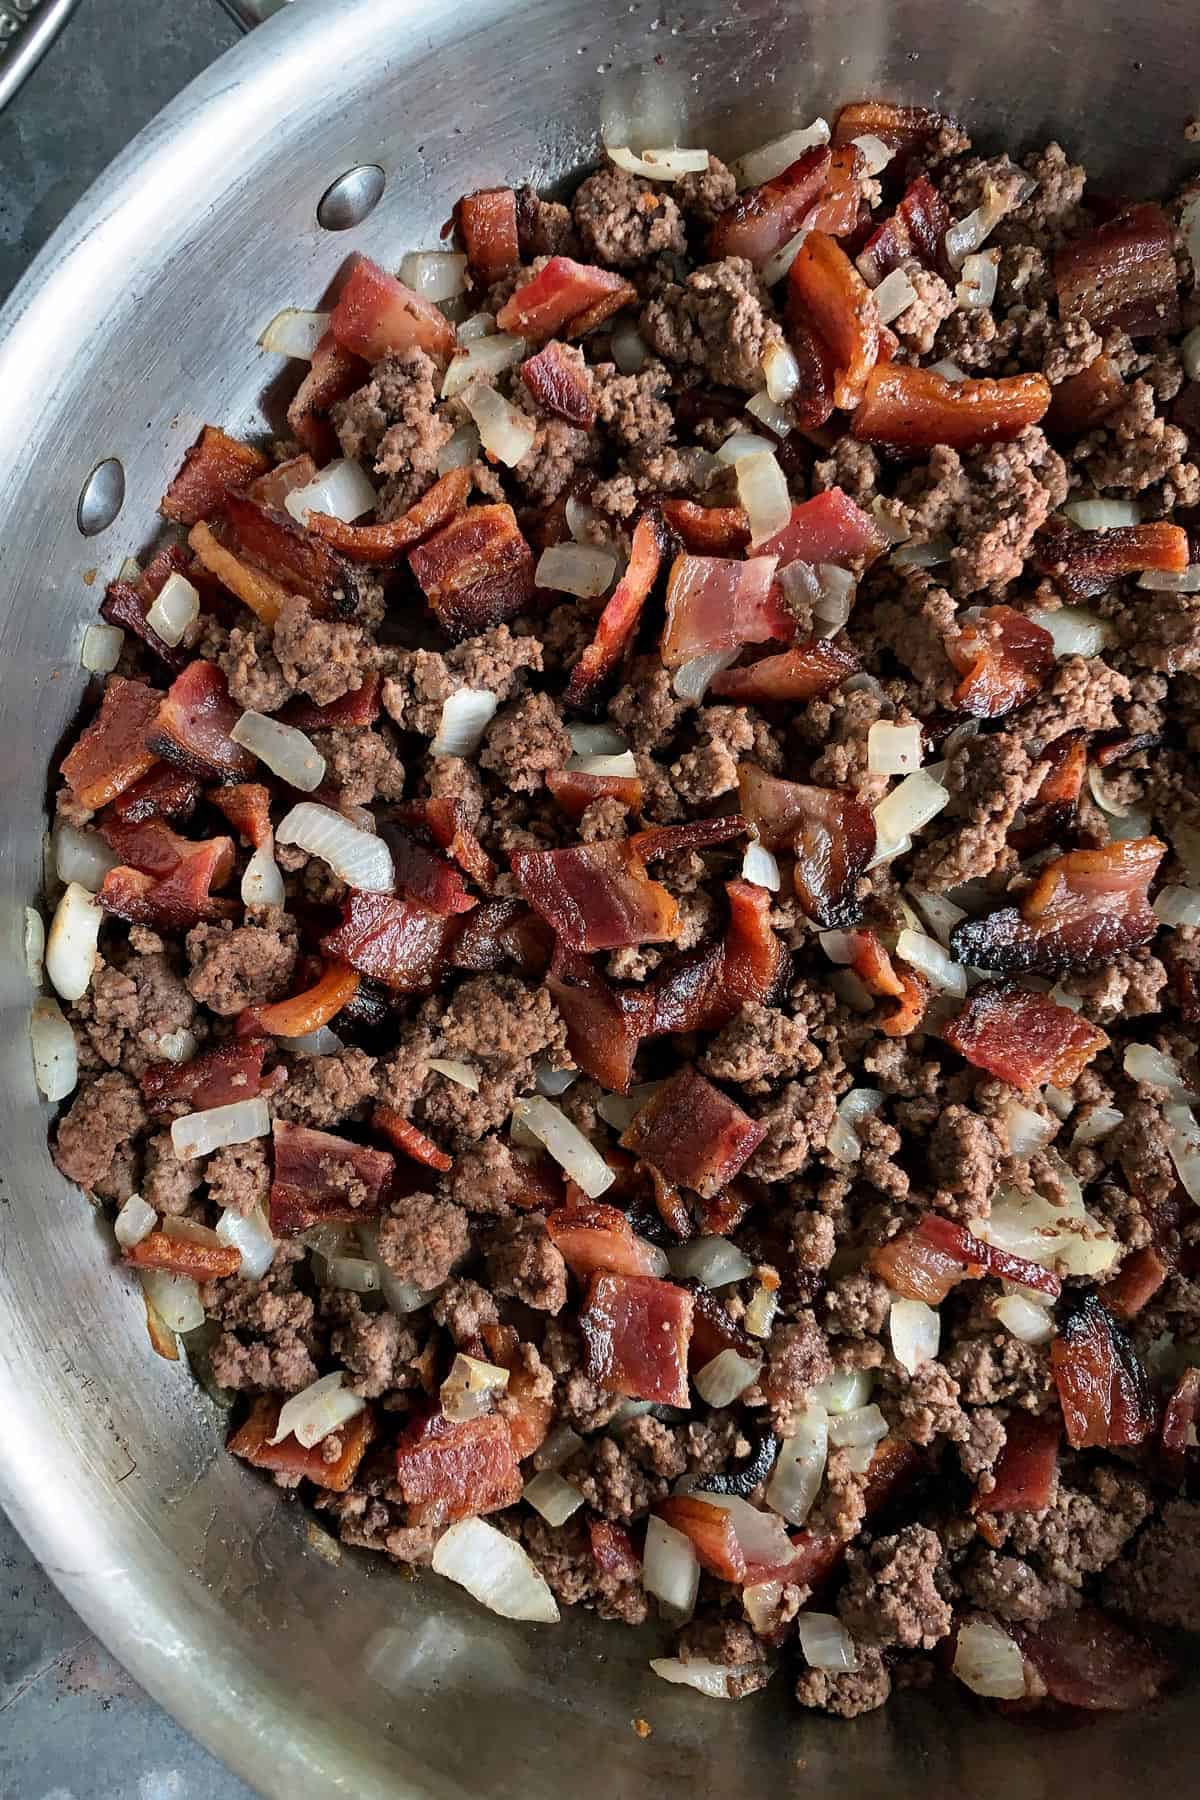 skillet of browned ground beef, bacon pieces, and chopped onion